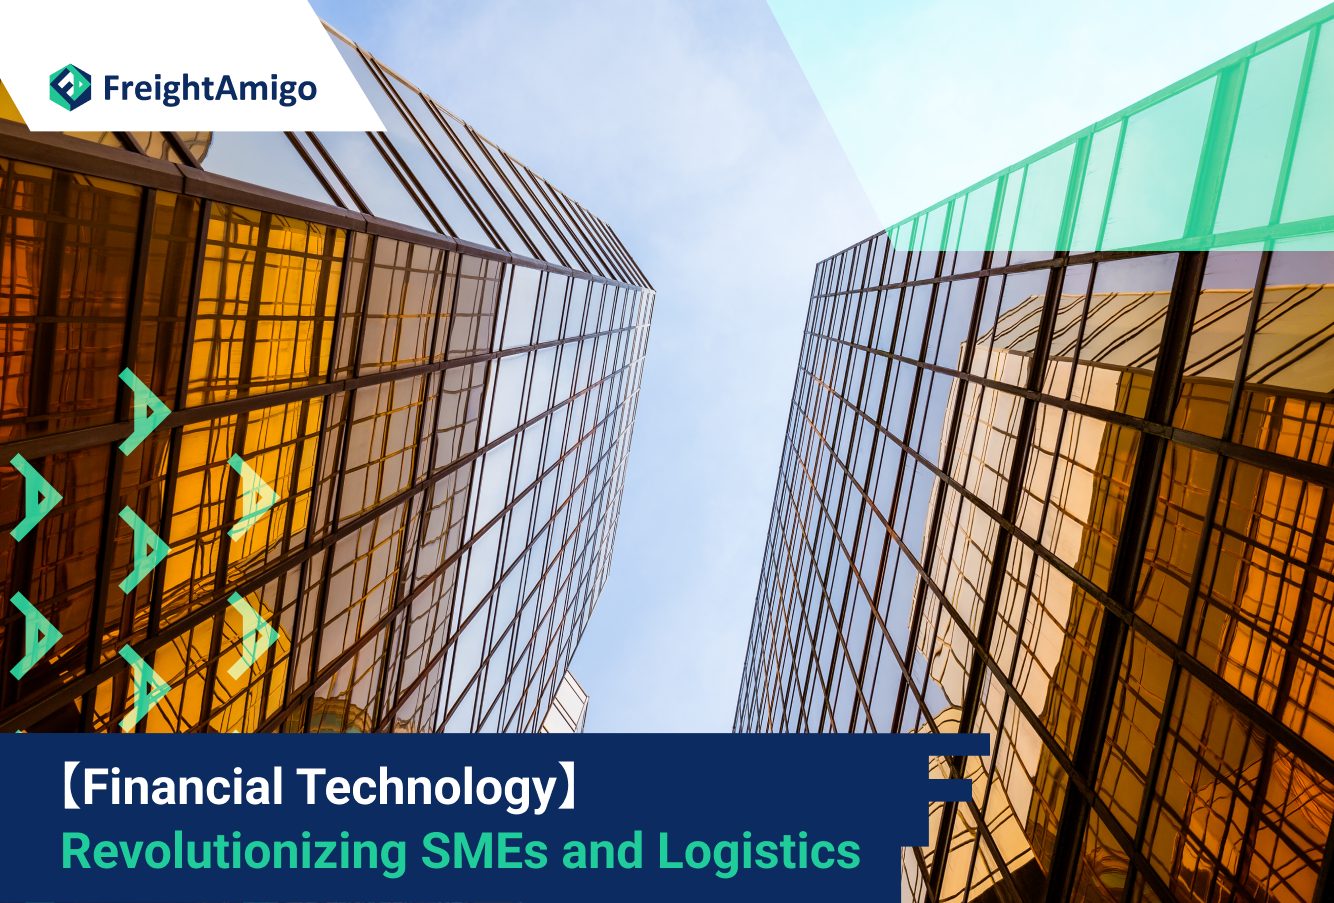 【Financial Technology】Revolutionizing SMEs and Logistics